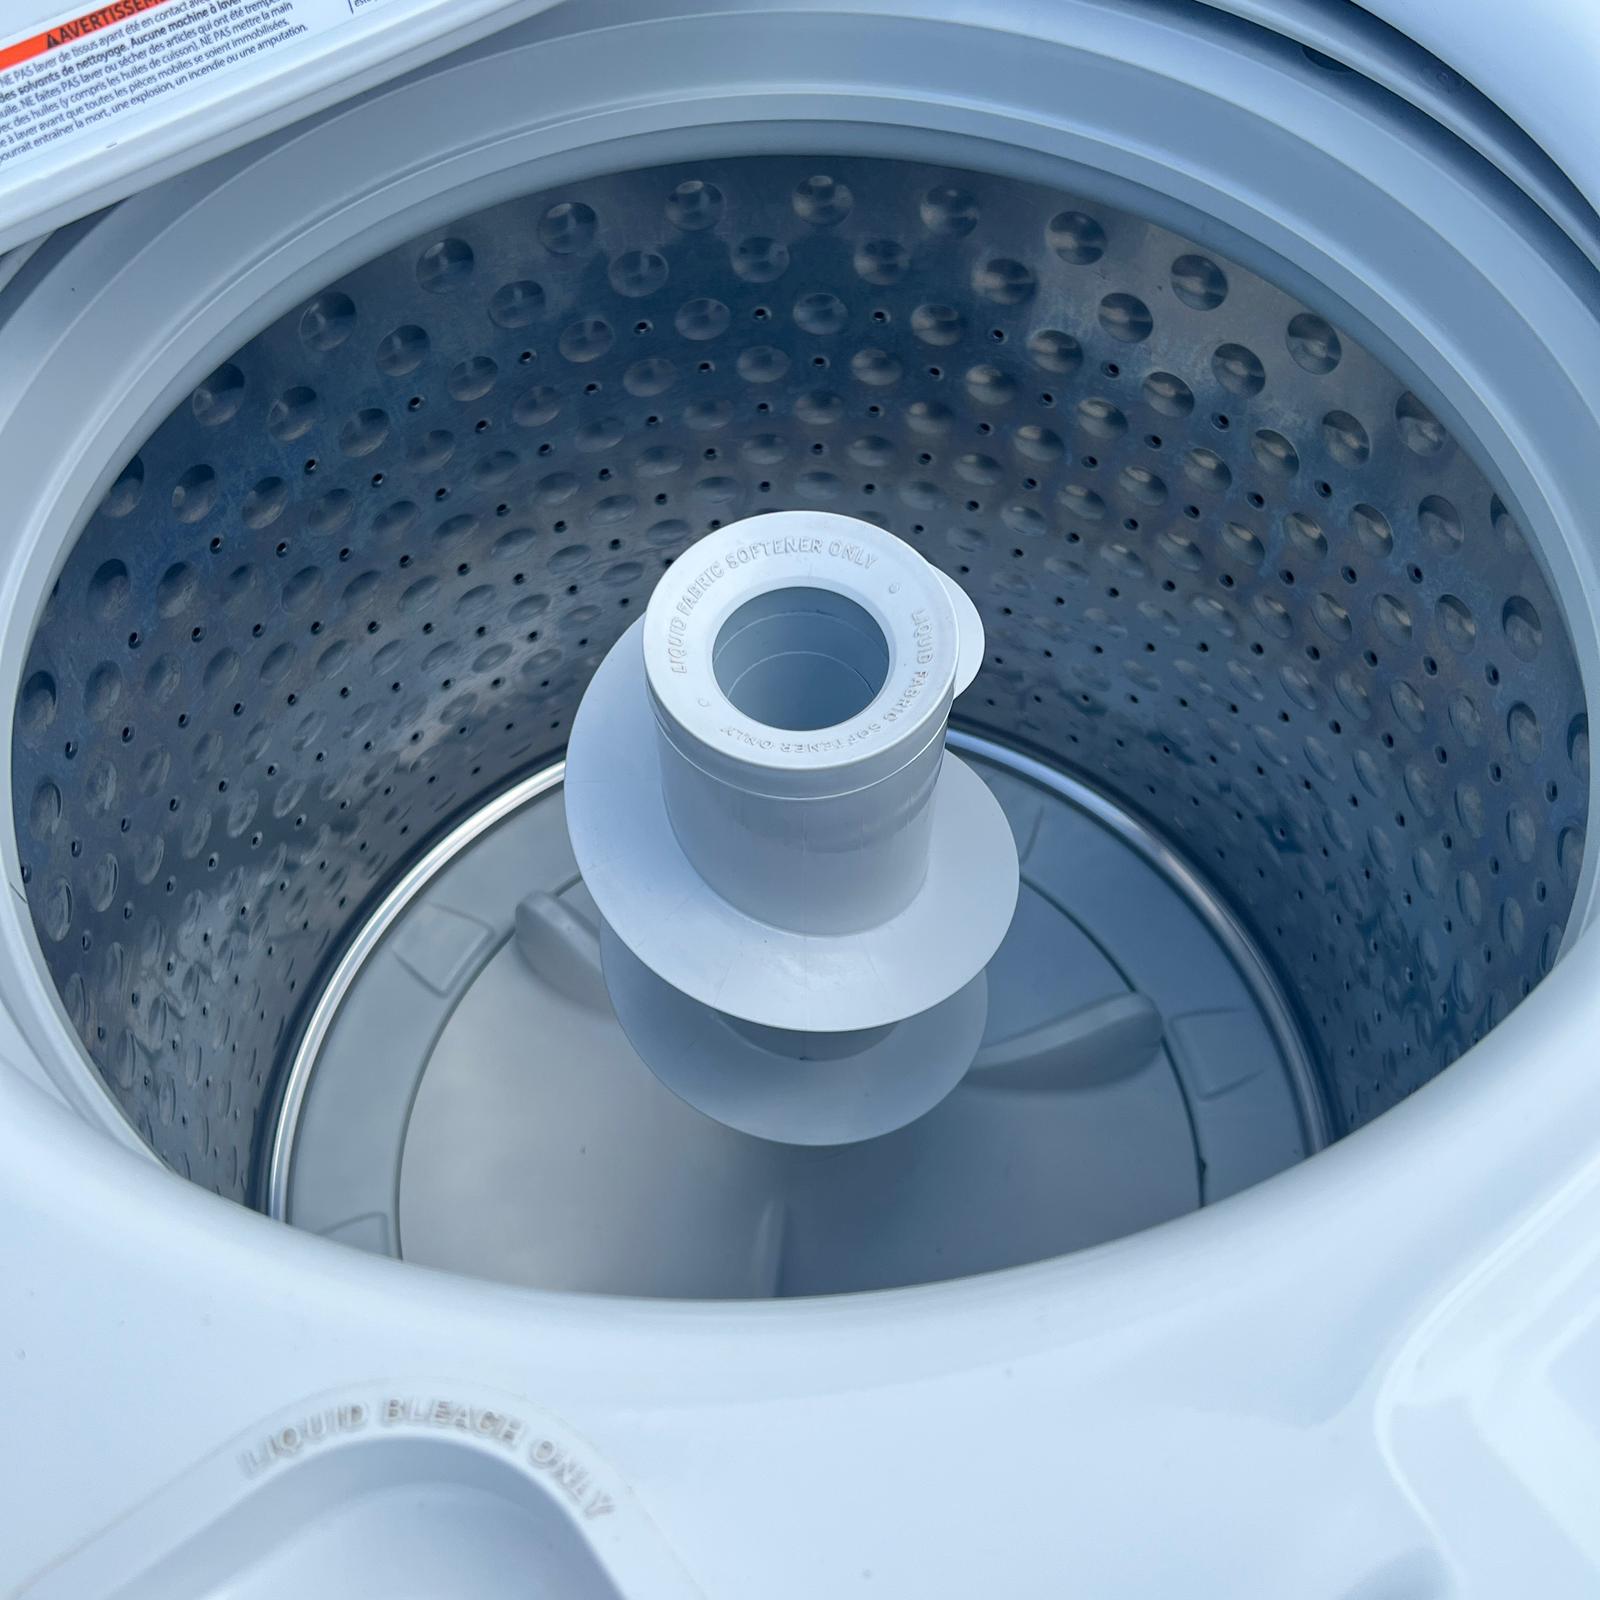 GE Washer and Dryer Set.